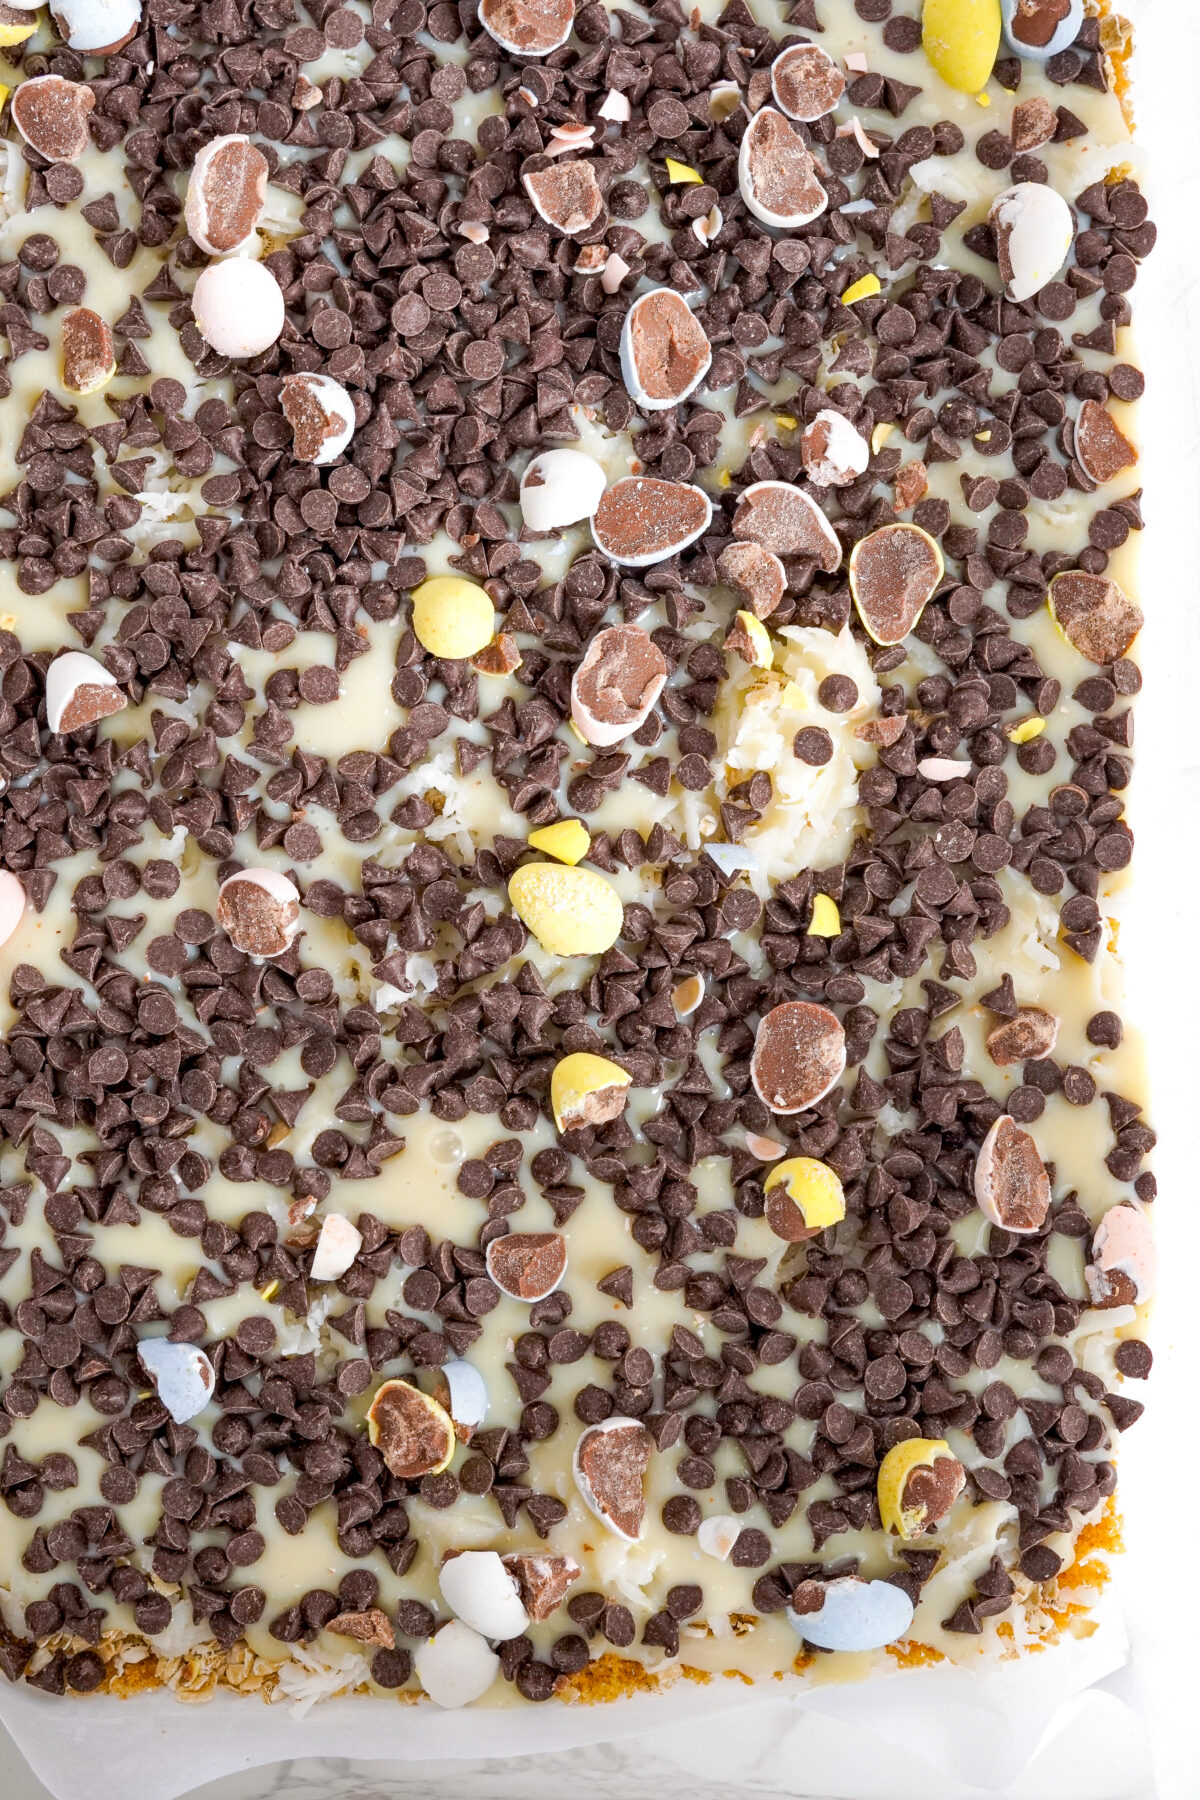 Everything sprinkled over with chocoalte chips and crushed chocolate eggs.